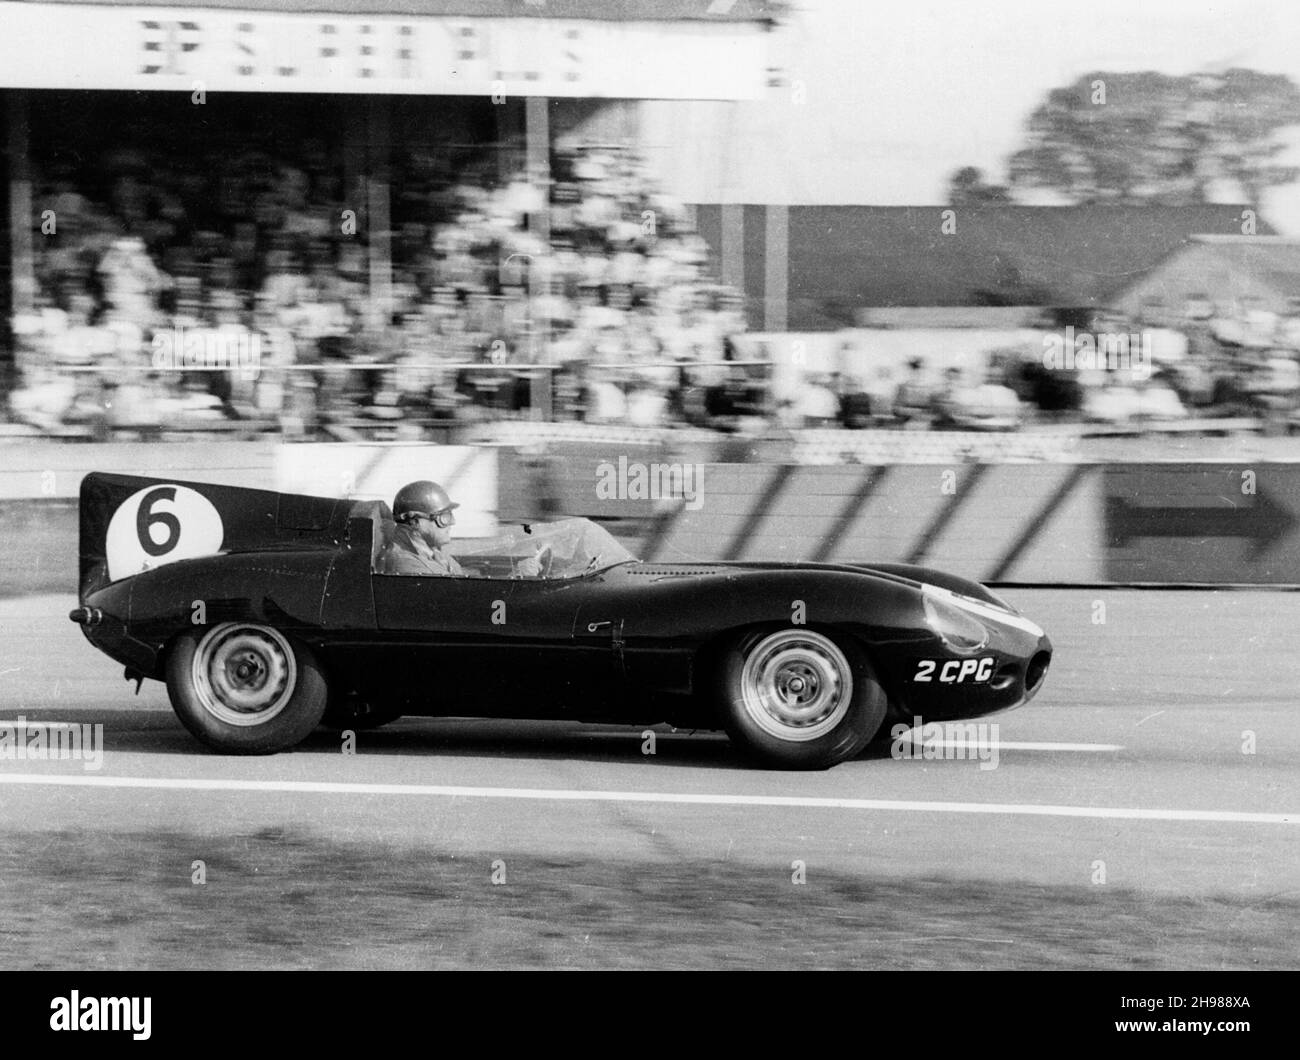 Duncan Hamilton driving a Jaguar D type, RAC Tourist Trophy, Goodwood, Sussex, 1958. Hamilton and his teammate Peter Blond finished in sixth place. Stock Photo